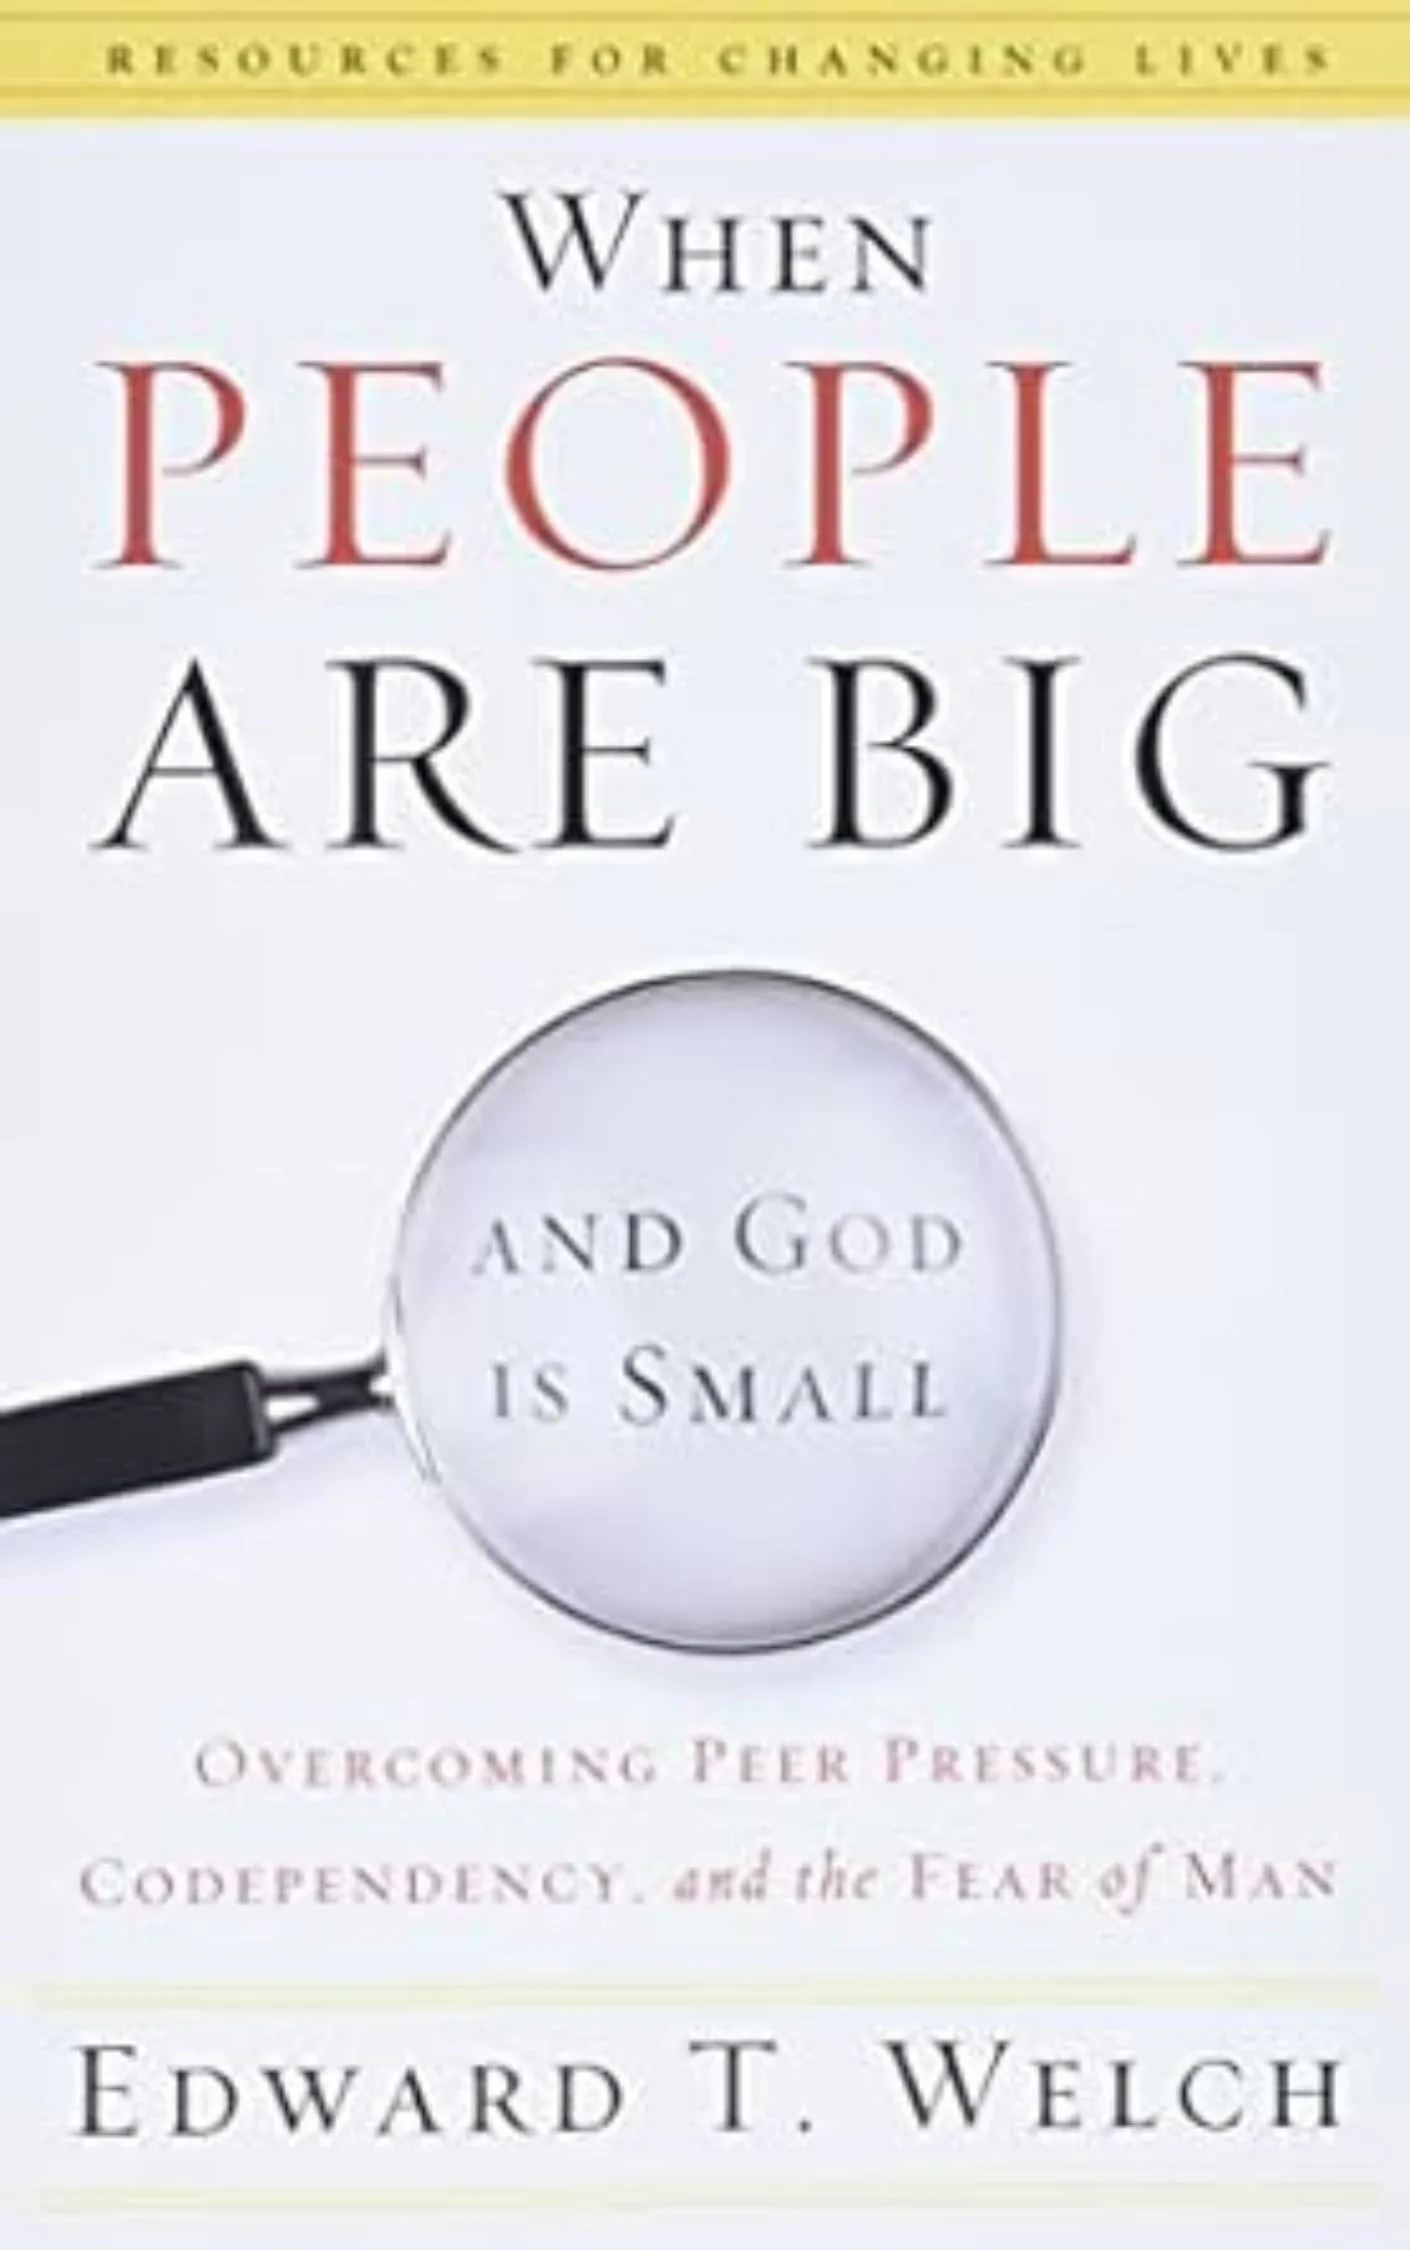 When People are Big and God is Small by Edward T. Welch